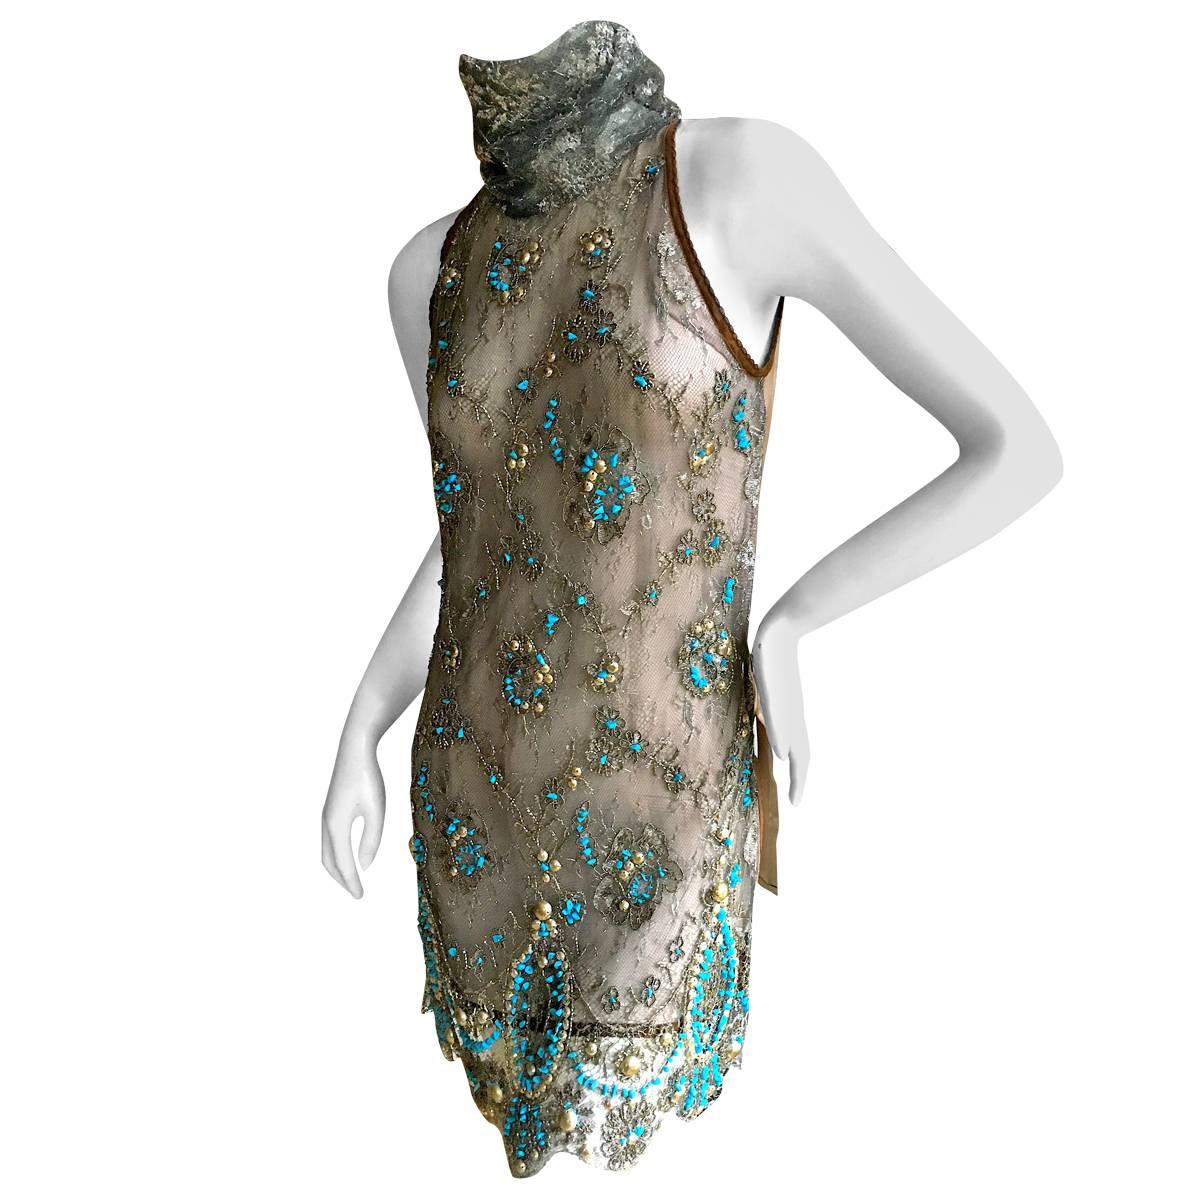 Gianfranco Ferre Silver Lace Tunic with Couture Quality Turquoise Embellishment For Sale